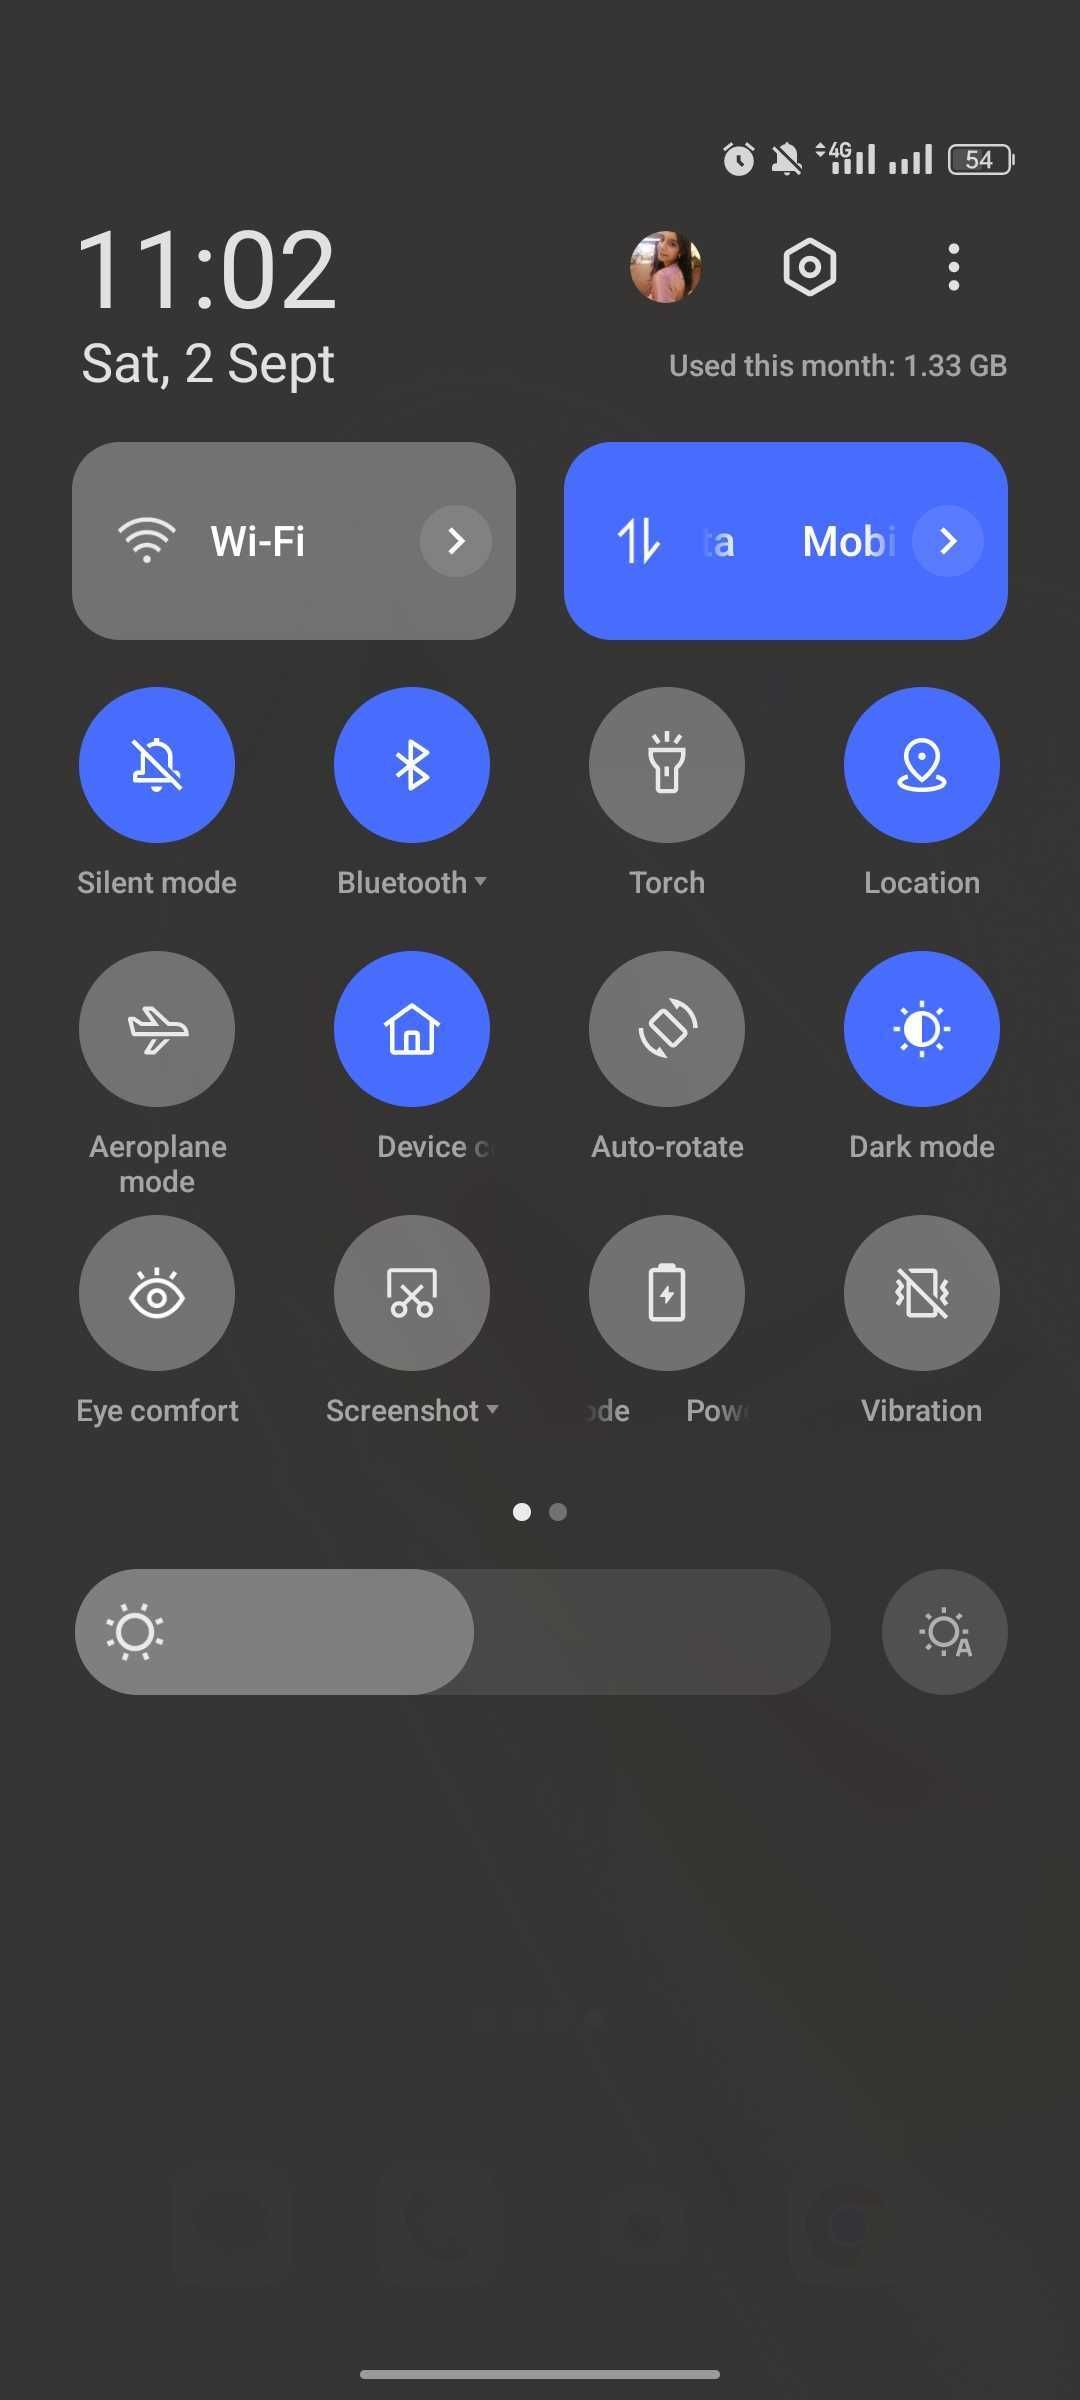 Enabling Bluetooth in Android